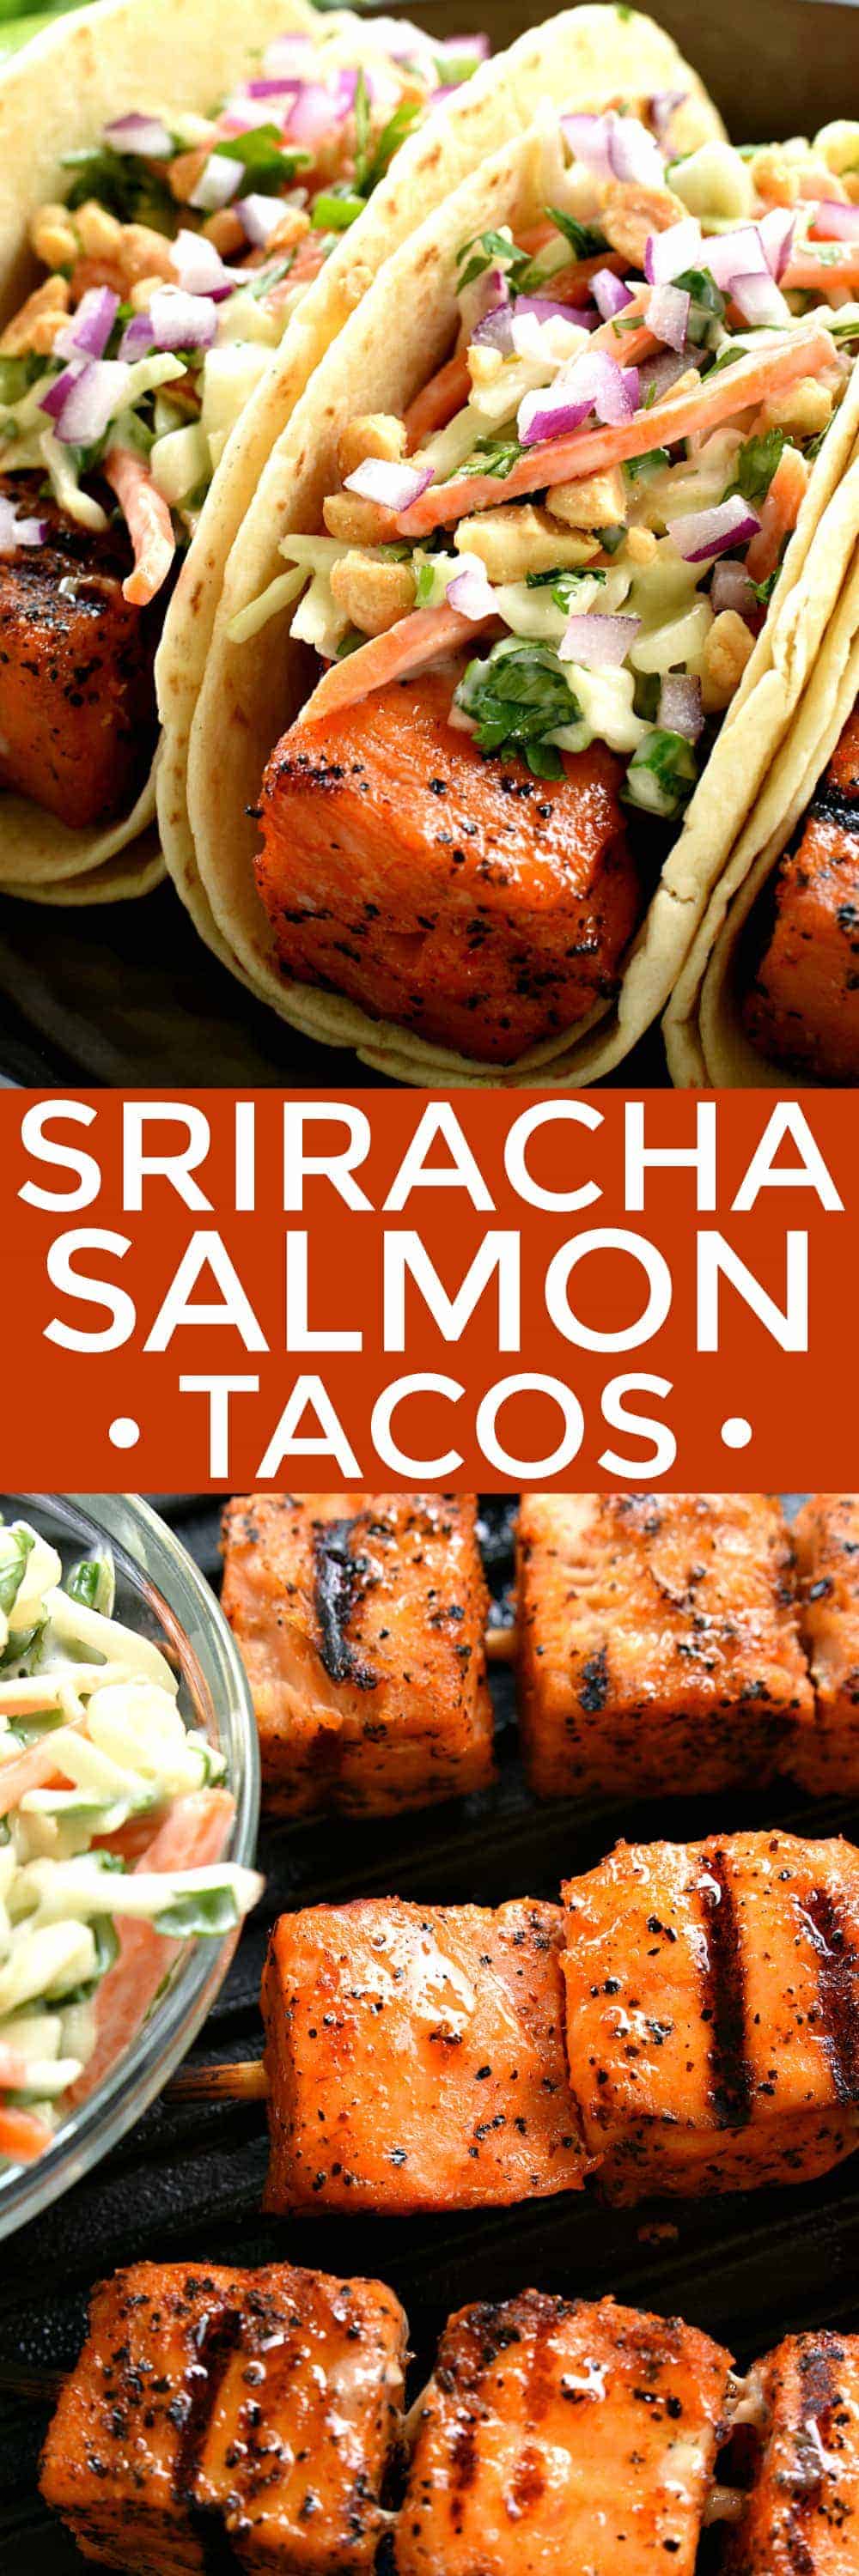 If you love salmon, you'll adore these Sriracha Salmon Tacos! They're topped with a simple Cilantro Lime Cole Slaw for the perfect balance of spicy and sweet. The BEST way to mix things up on taco night!